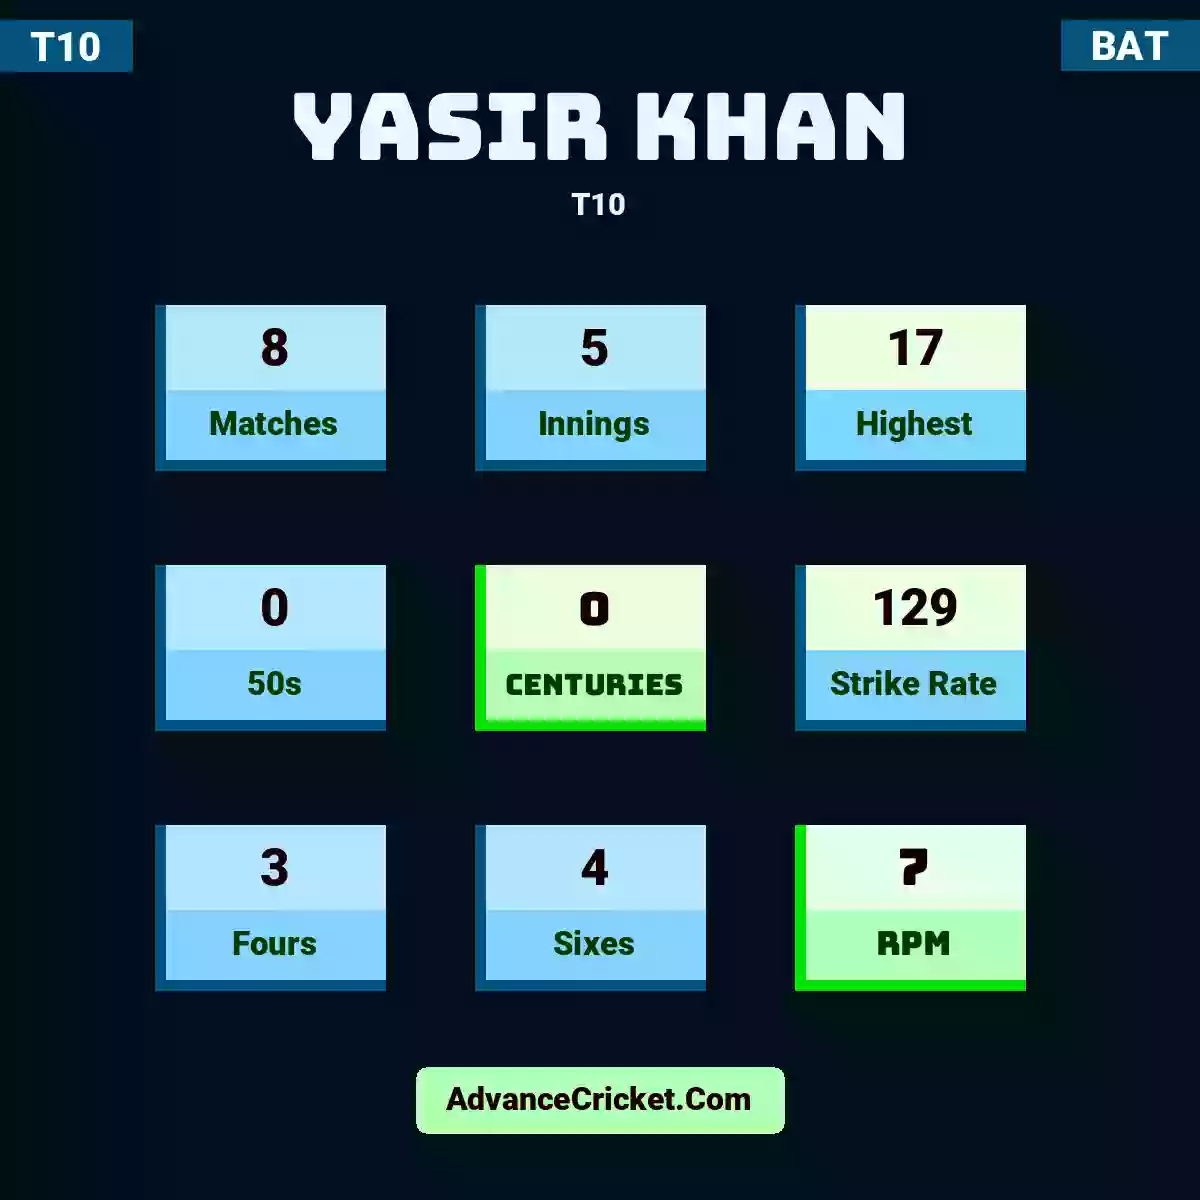 Yasir Khan T10 , Yasir Khan played 8 matches, scored 17 runs as highest, 0 half-centuries, and 0 centuries, with a strike rate of 129. Y.Khan hit 3 fours and 4 sixes, with an RPM of 7.